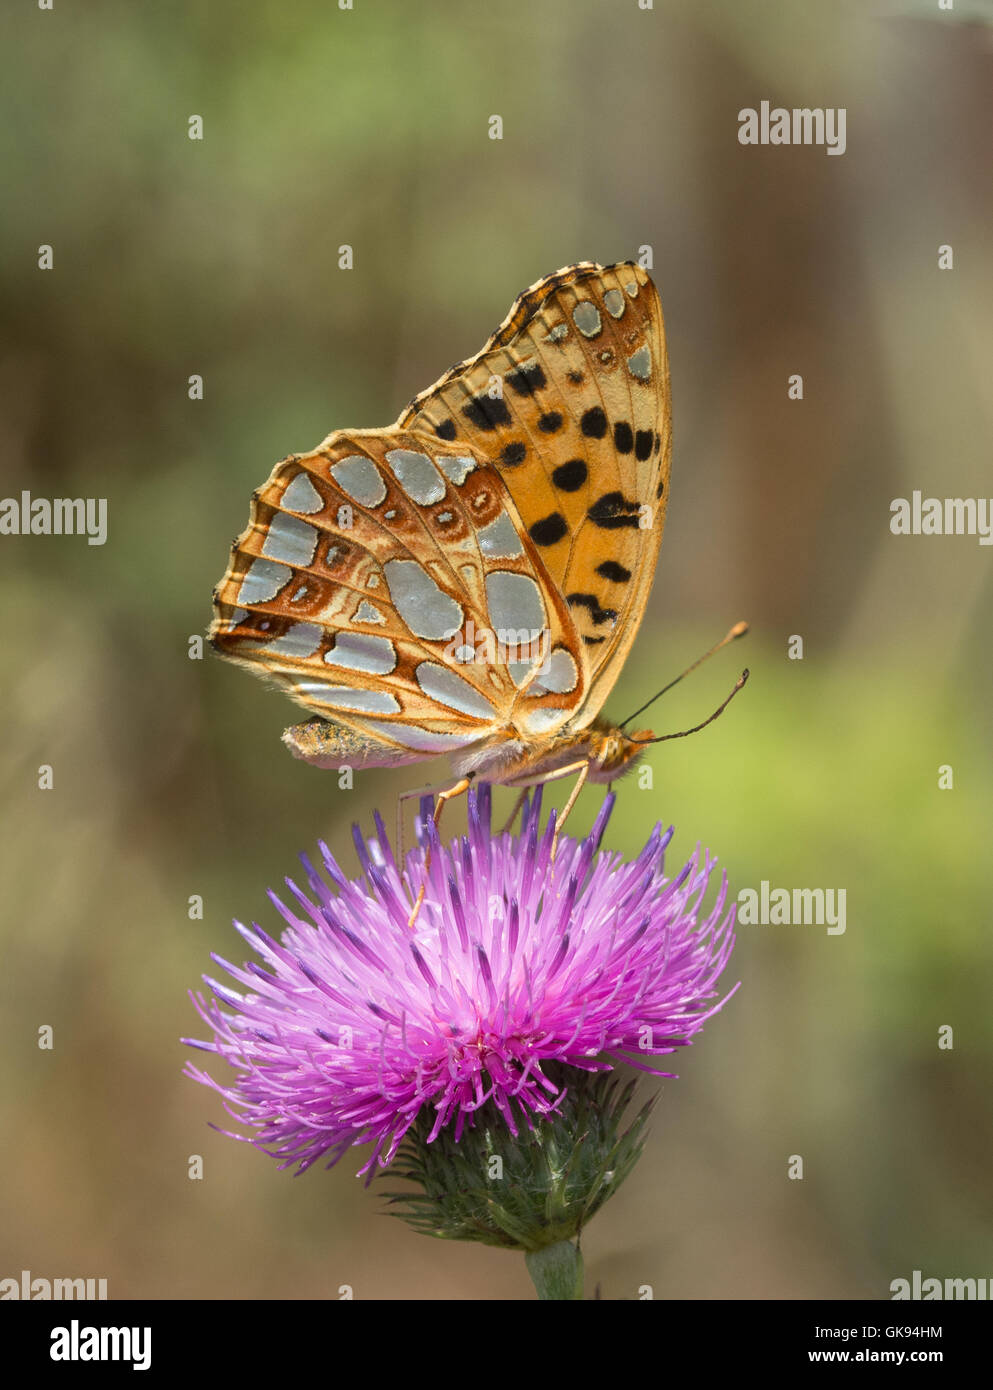 Queen of Spain fritillary butterfly (Issoria lathonia) nectaring on flower in Hungary Stock Photo